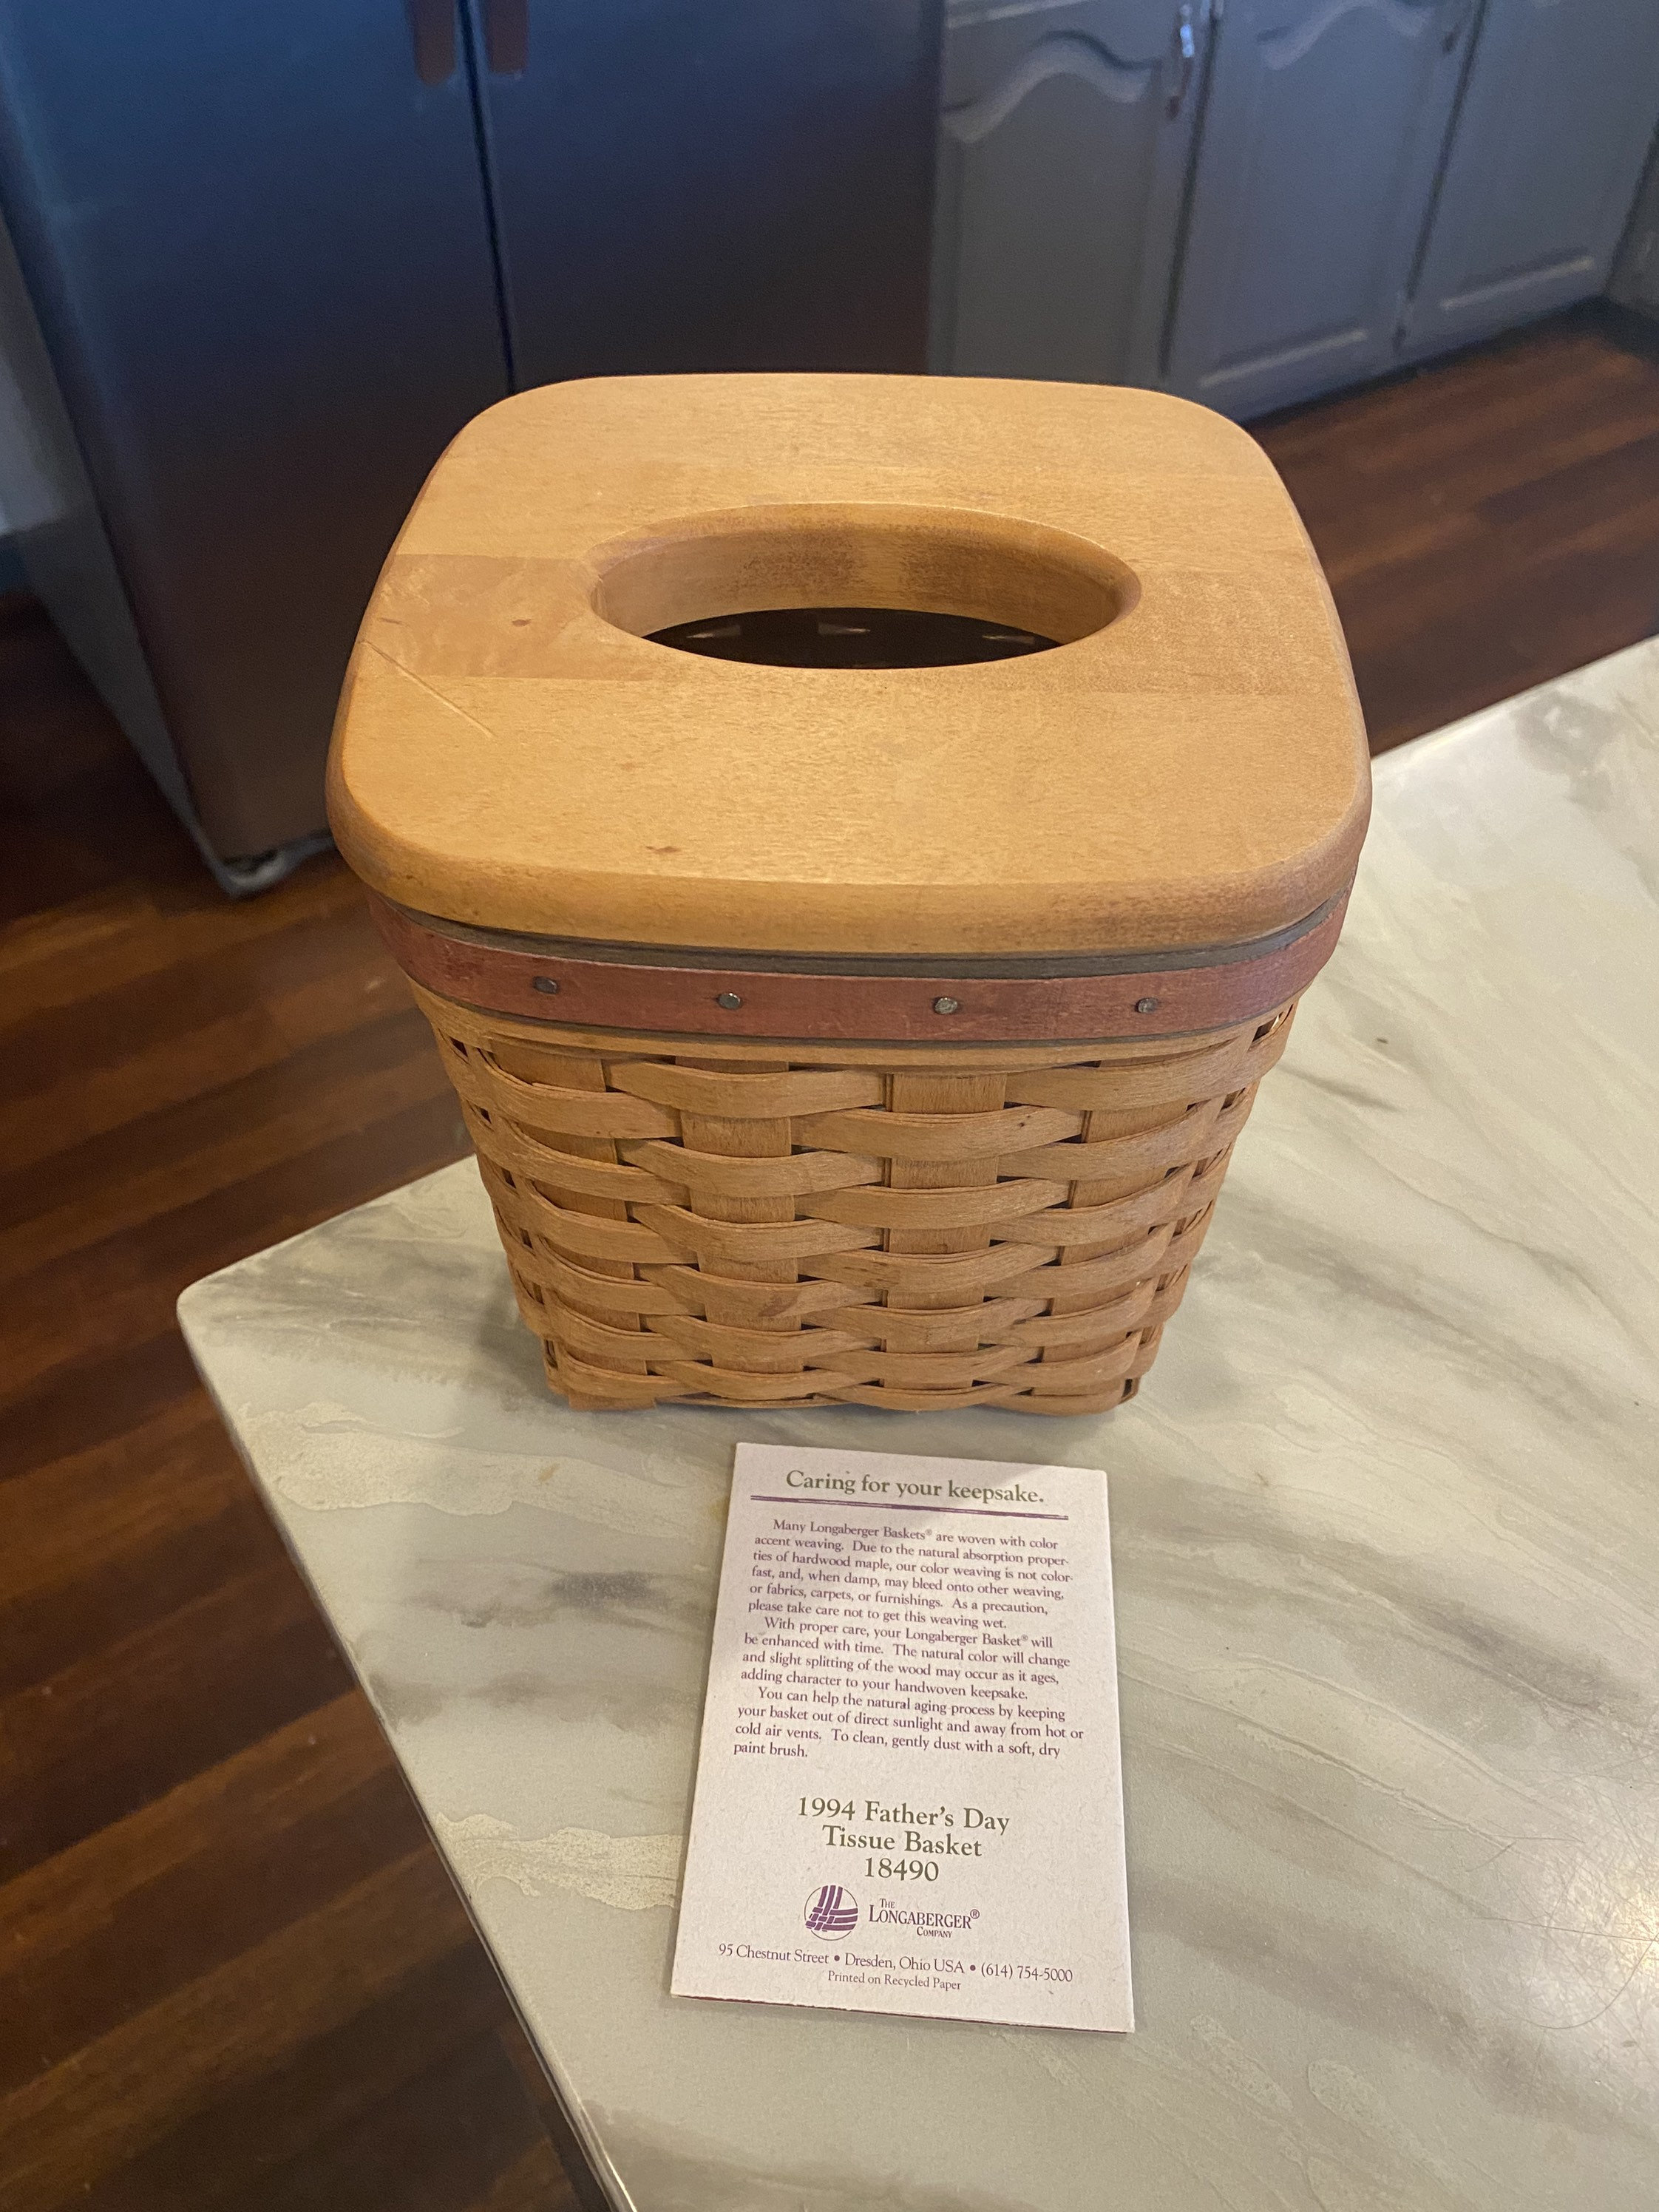 New! Tall Tissue Basket Liner from Longaberger Paprika fabric 